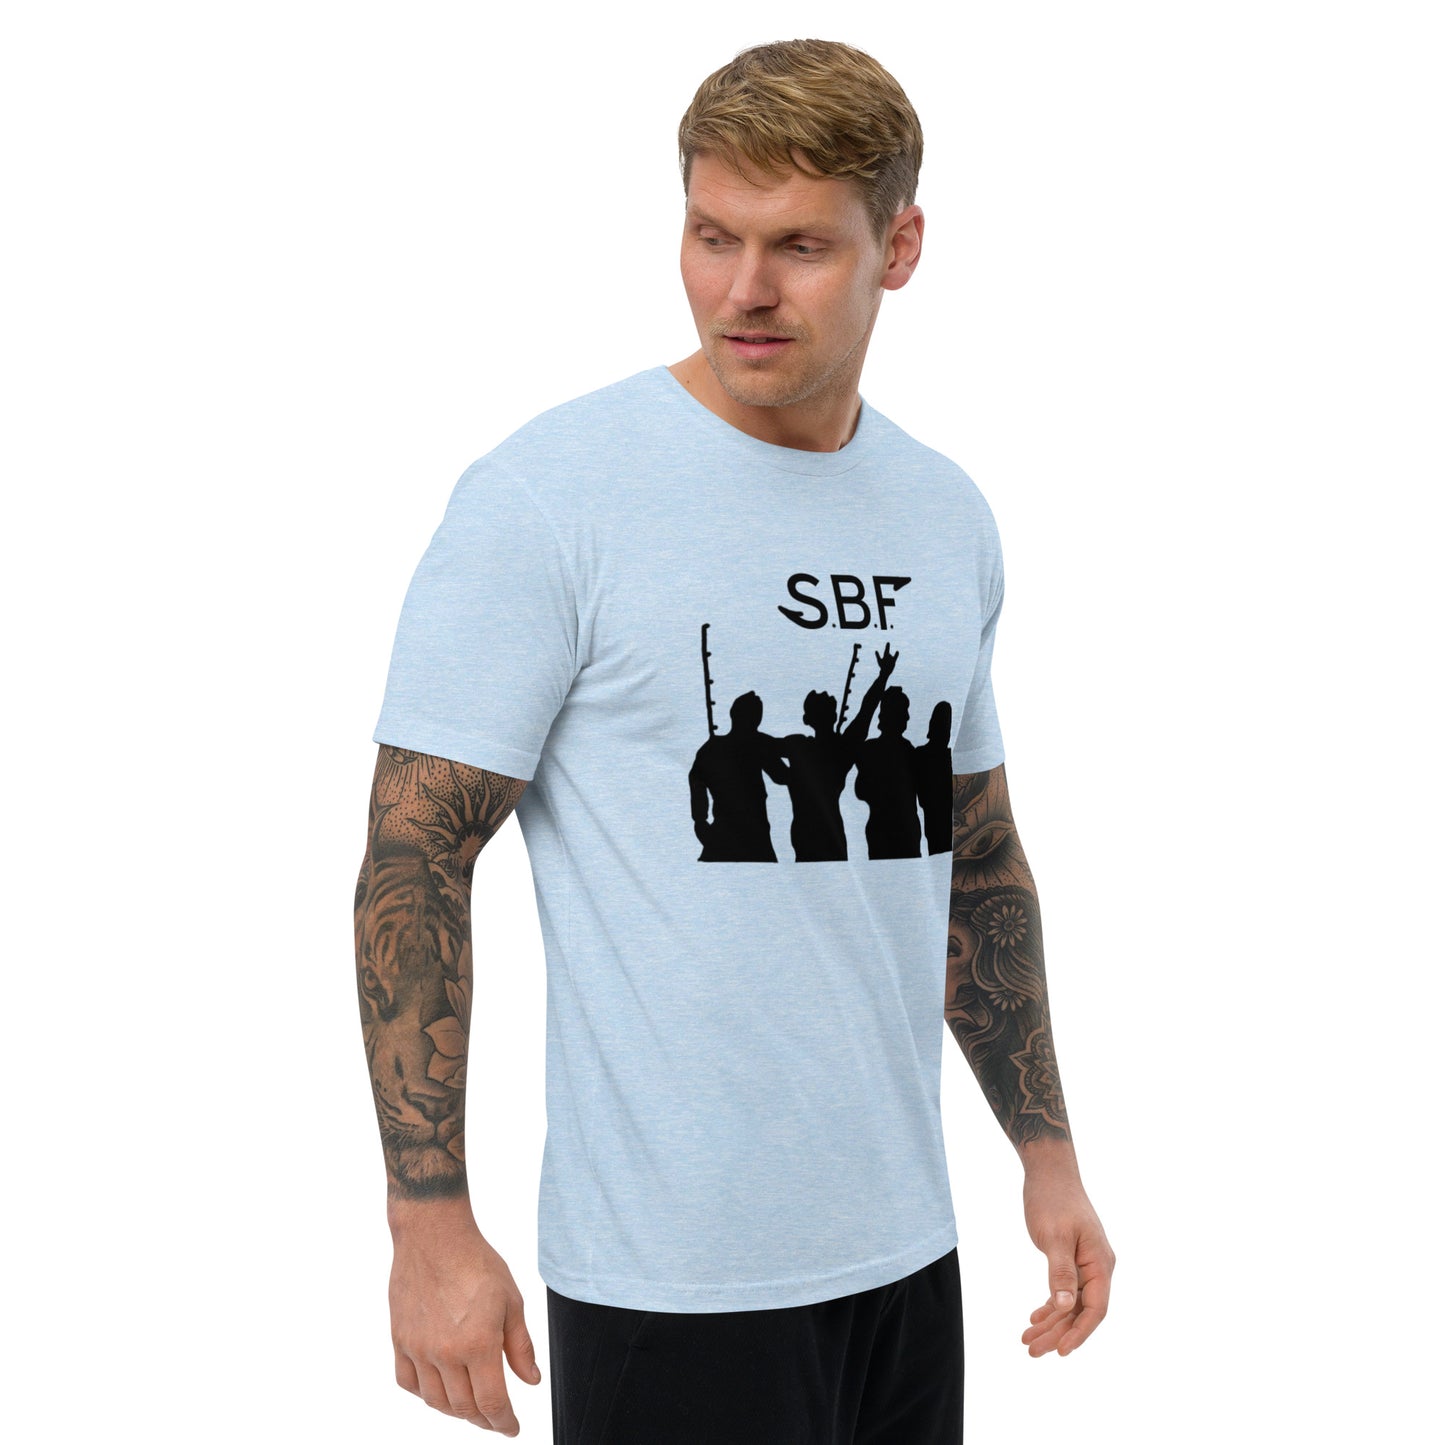 SBF "With The Boys" Short Sleeve T-shirt